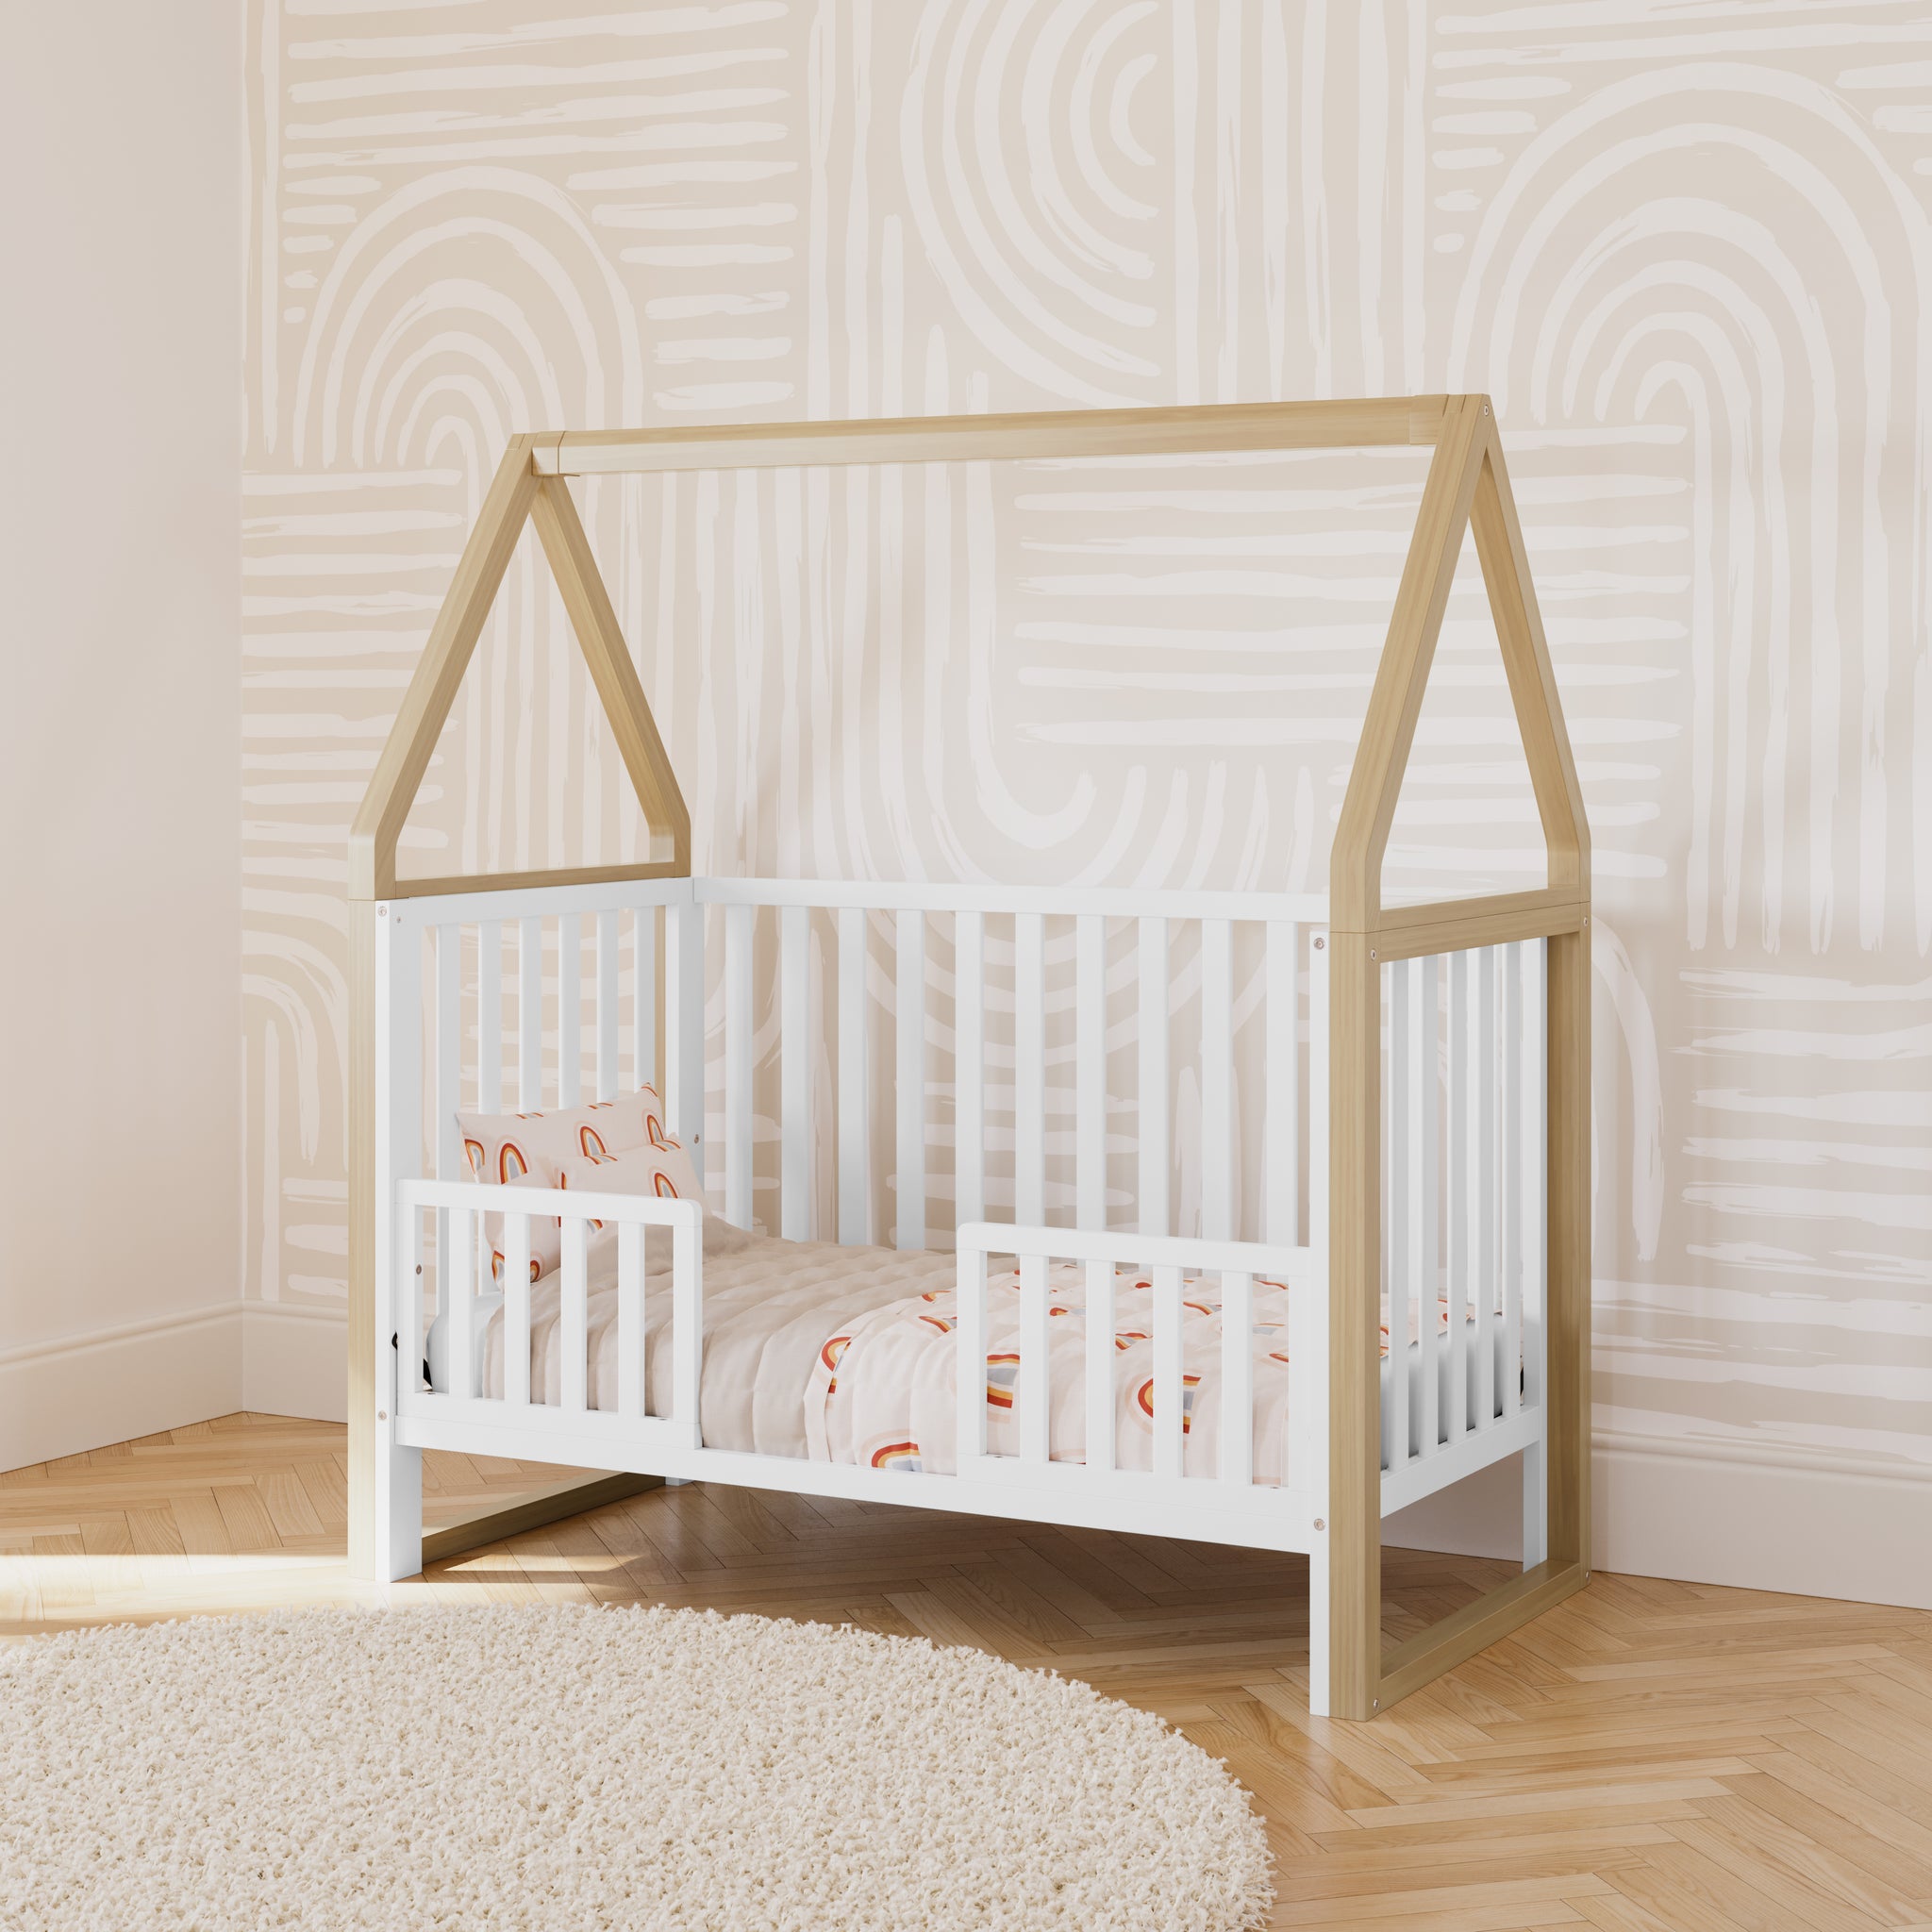 white with driftwood convertible canopy crib in toddler bed conversion with two toddler safety guardrails, in nursery